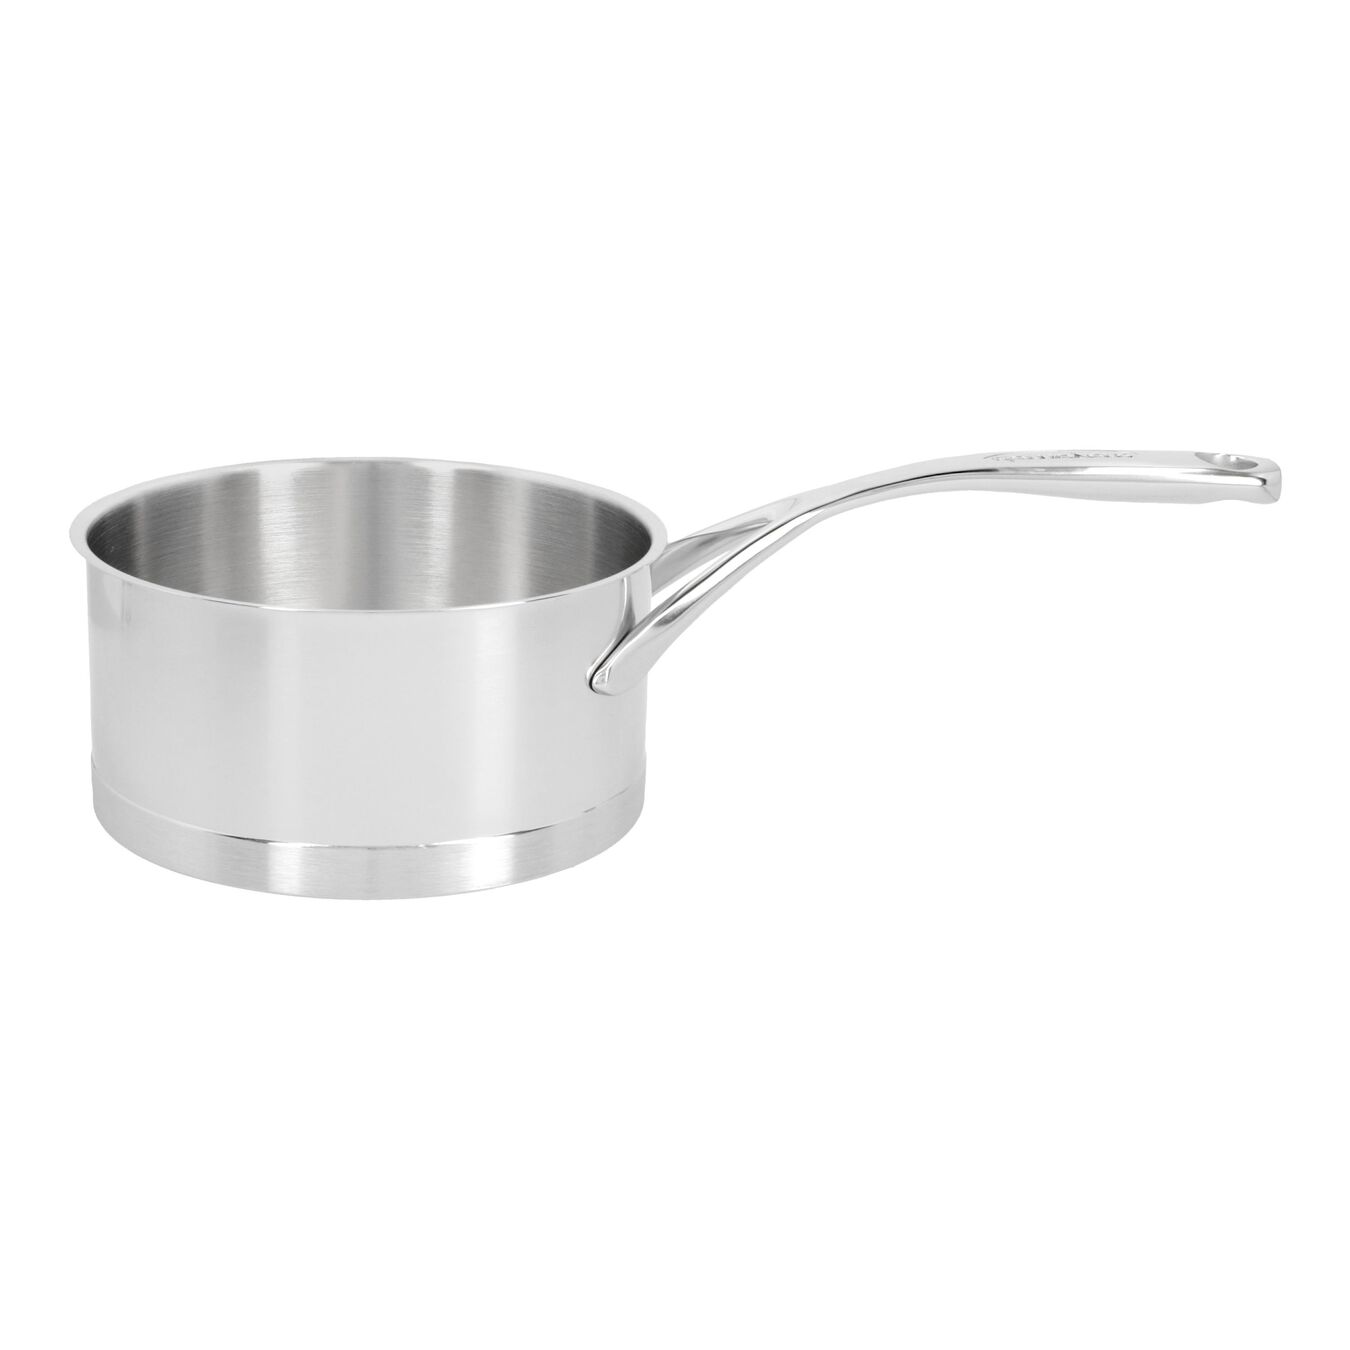 16 cm 18/10 Stainless Steel Saucepan without lid silver,,large 1